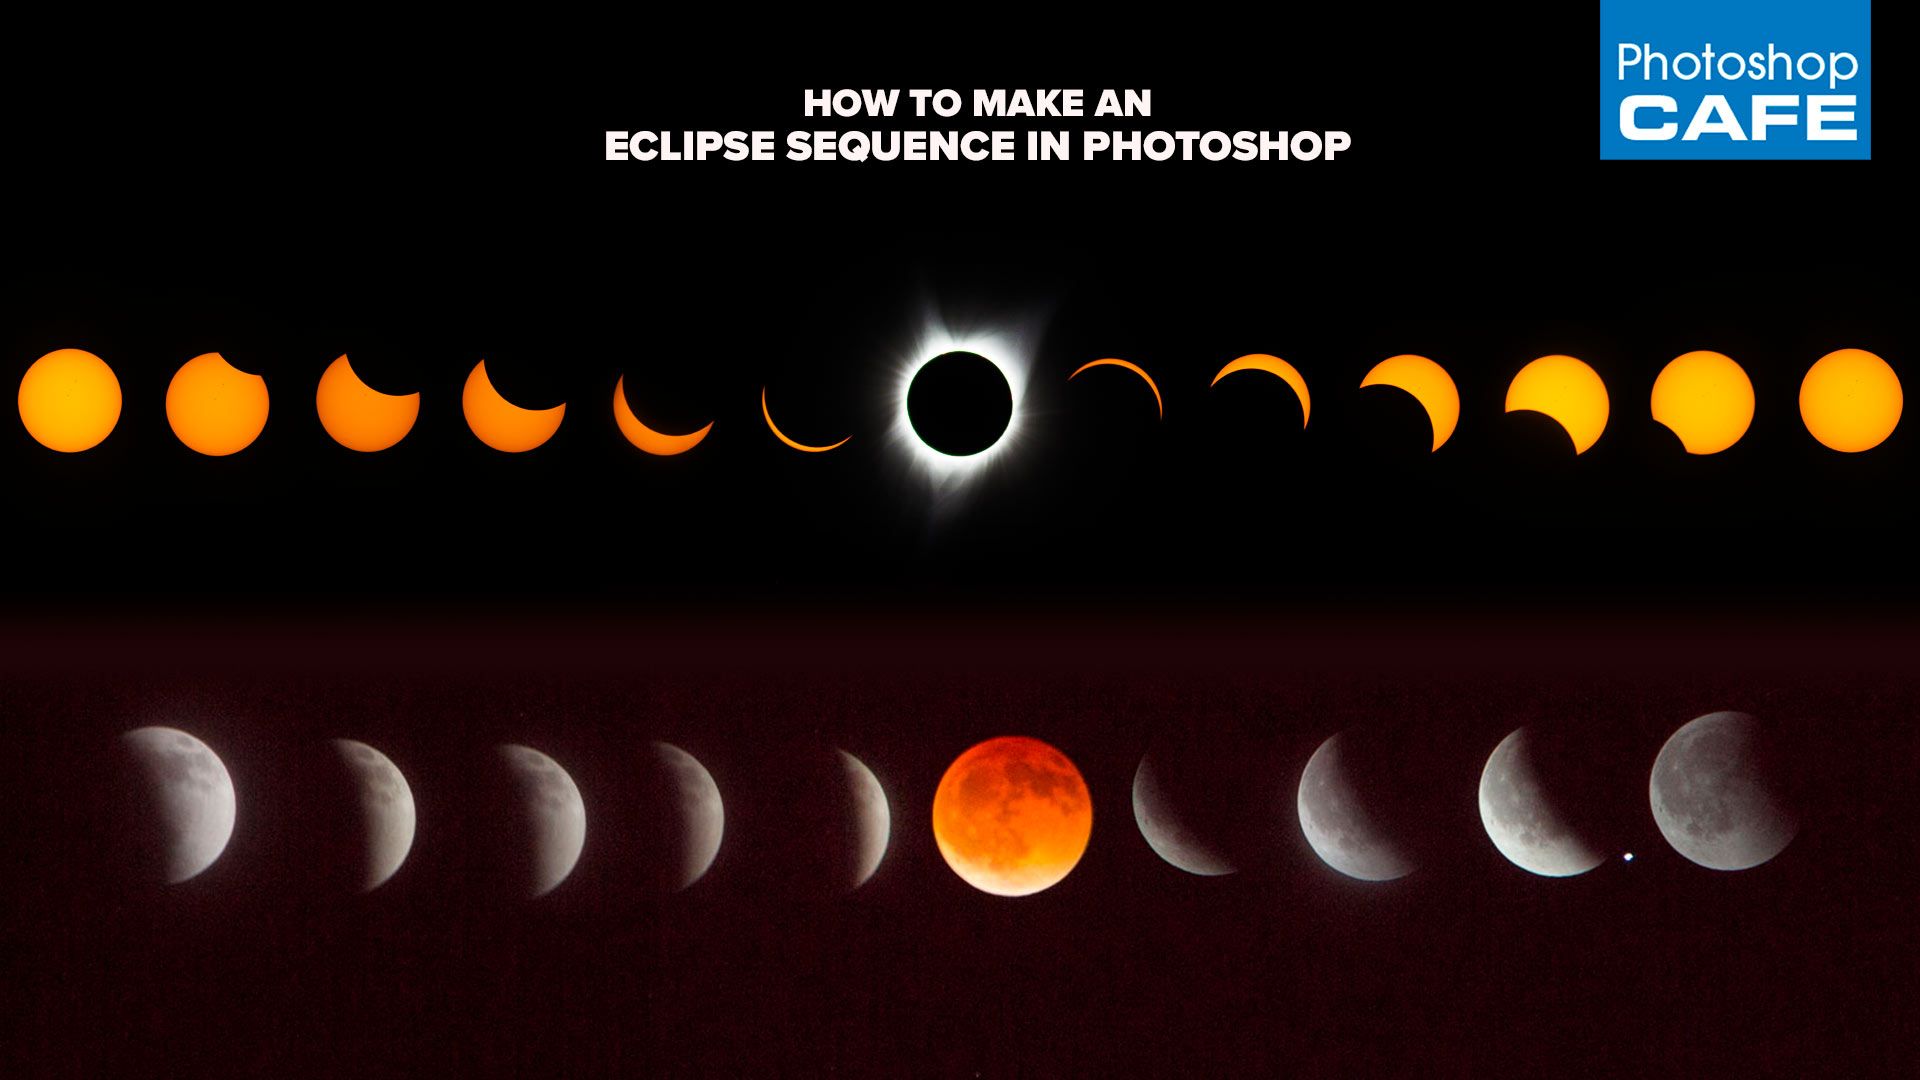 How to Photograph an eclipse and make an eclipse sequence in Photohop: Lunar eclipse + Solar eclipse photography tutorial. Eclipse photography, Solar eclipse photography, Photohop